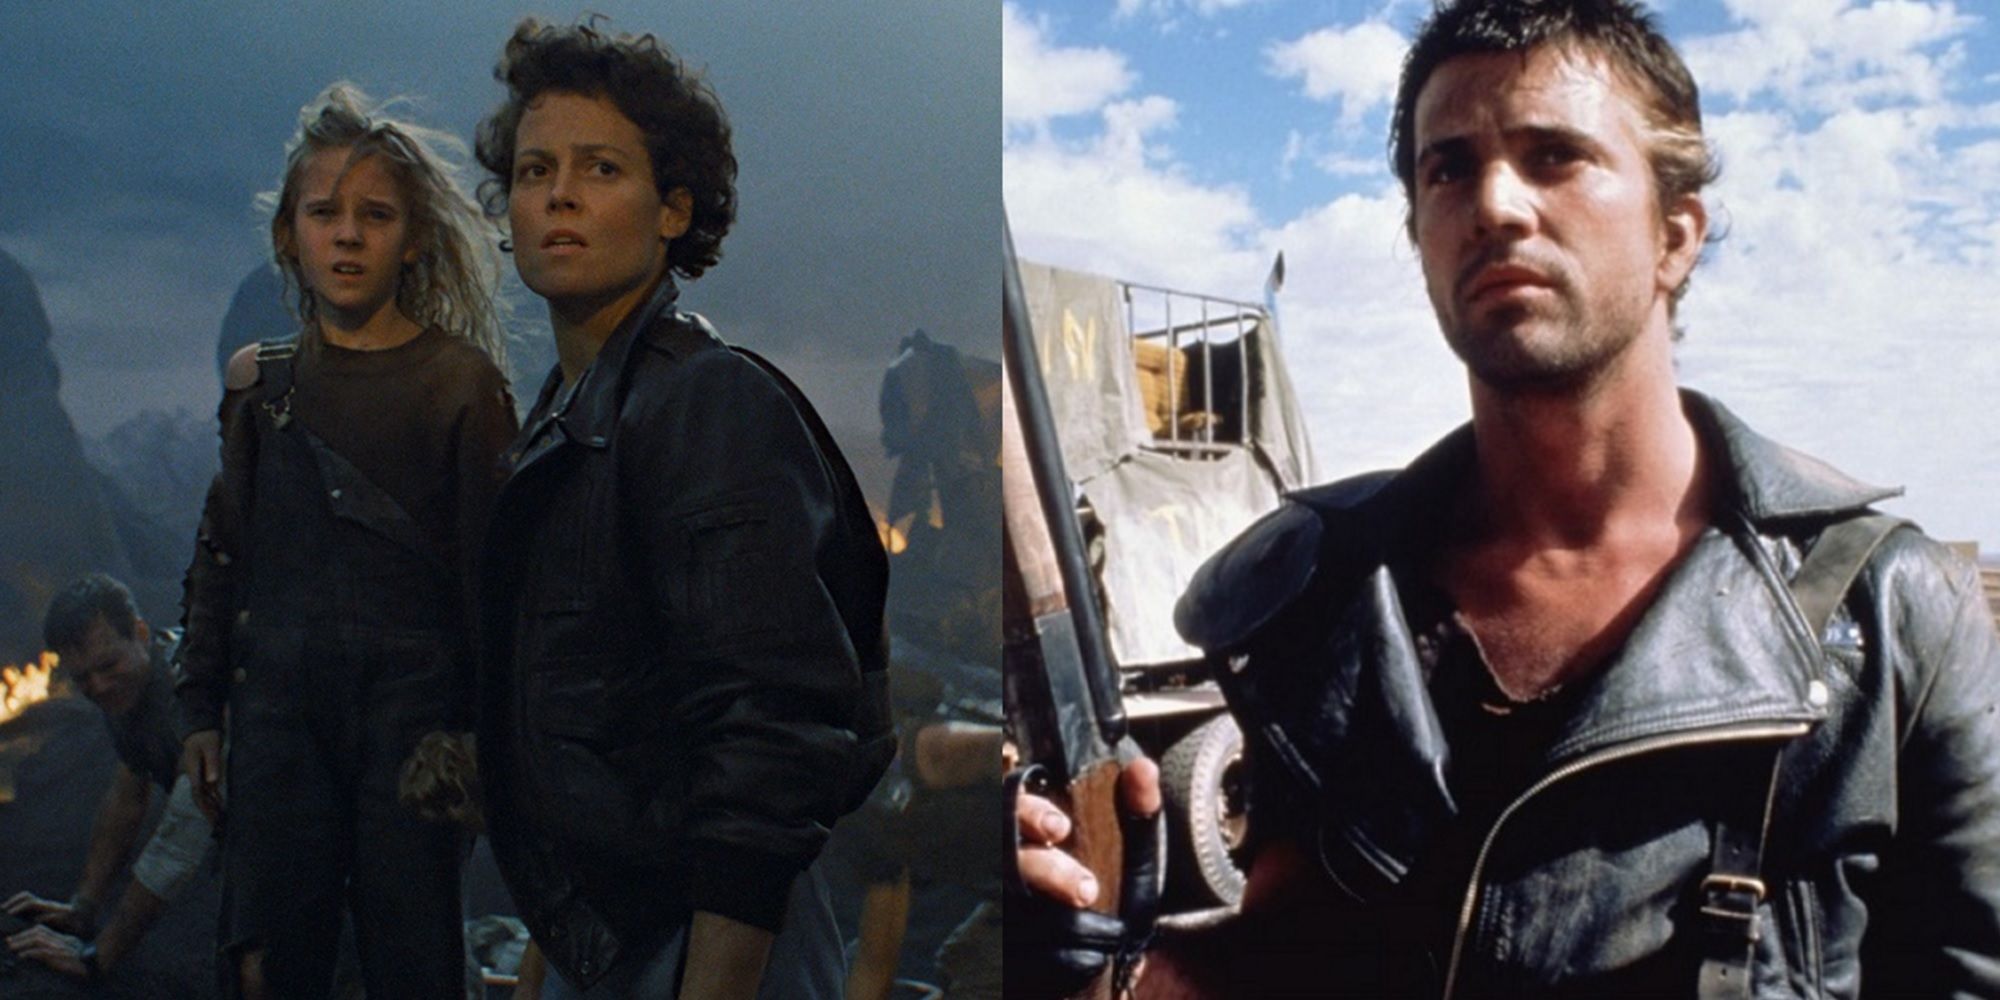 Aliens and Mad Max 2